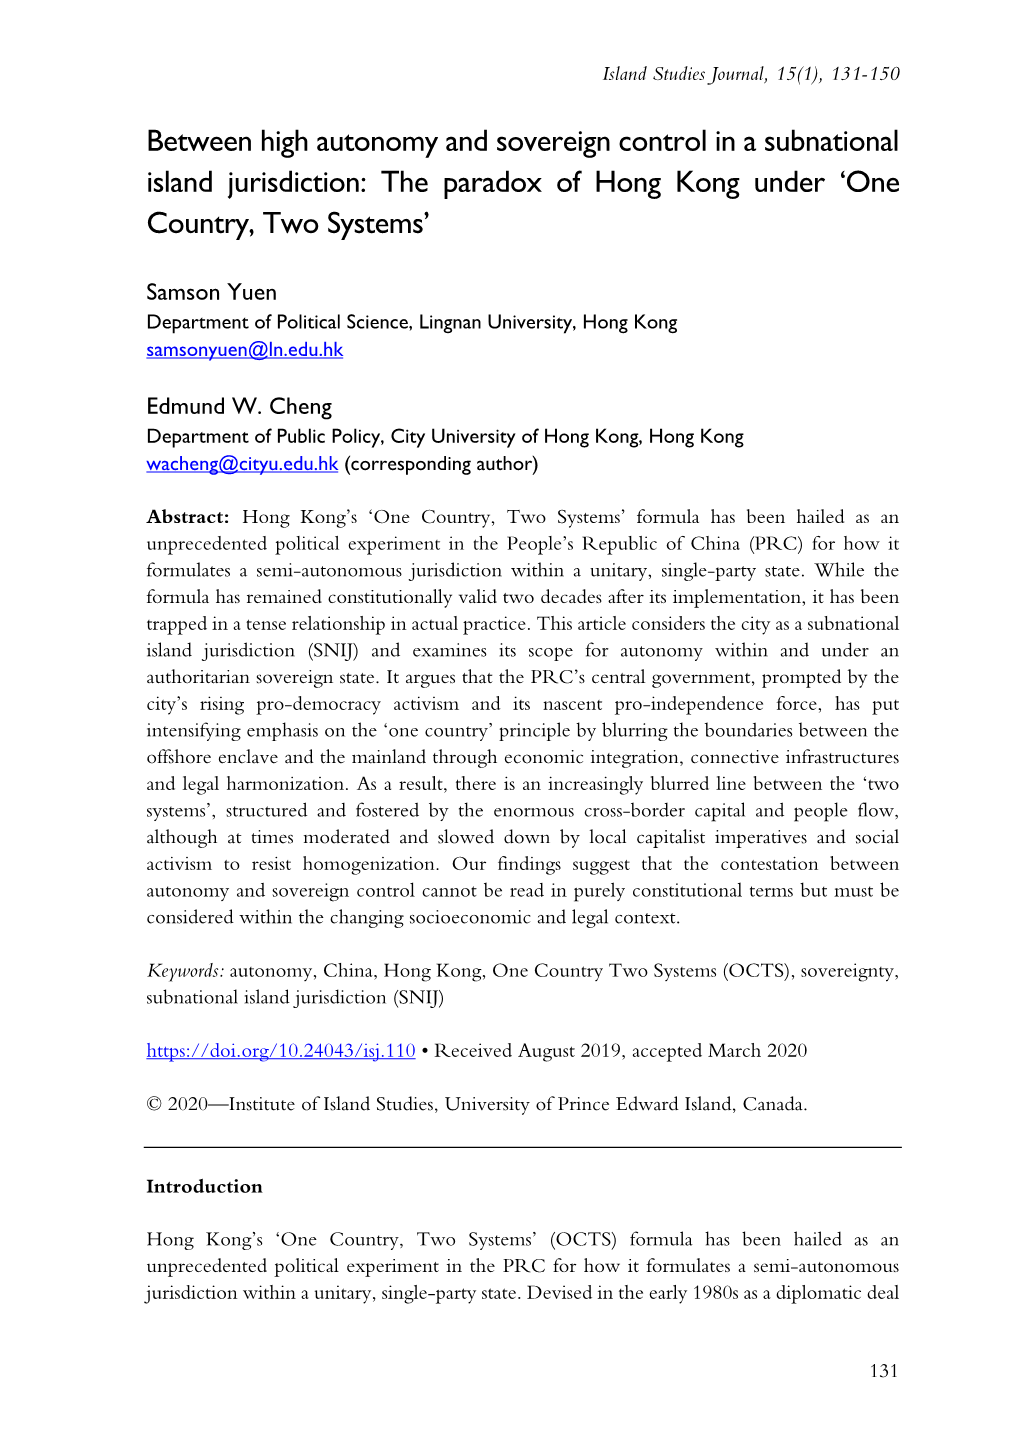 Between High Autonomy and Sovereign Control in a Subnational Island Jurisdiction: the Paradox of Hong Kong Under ‘One Country, Two Systems’